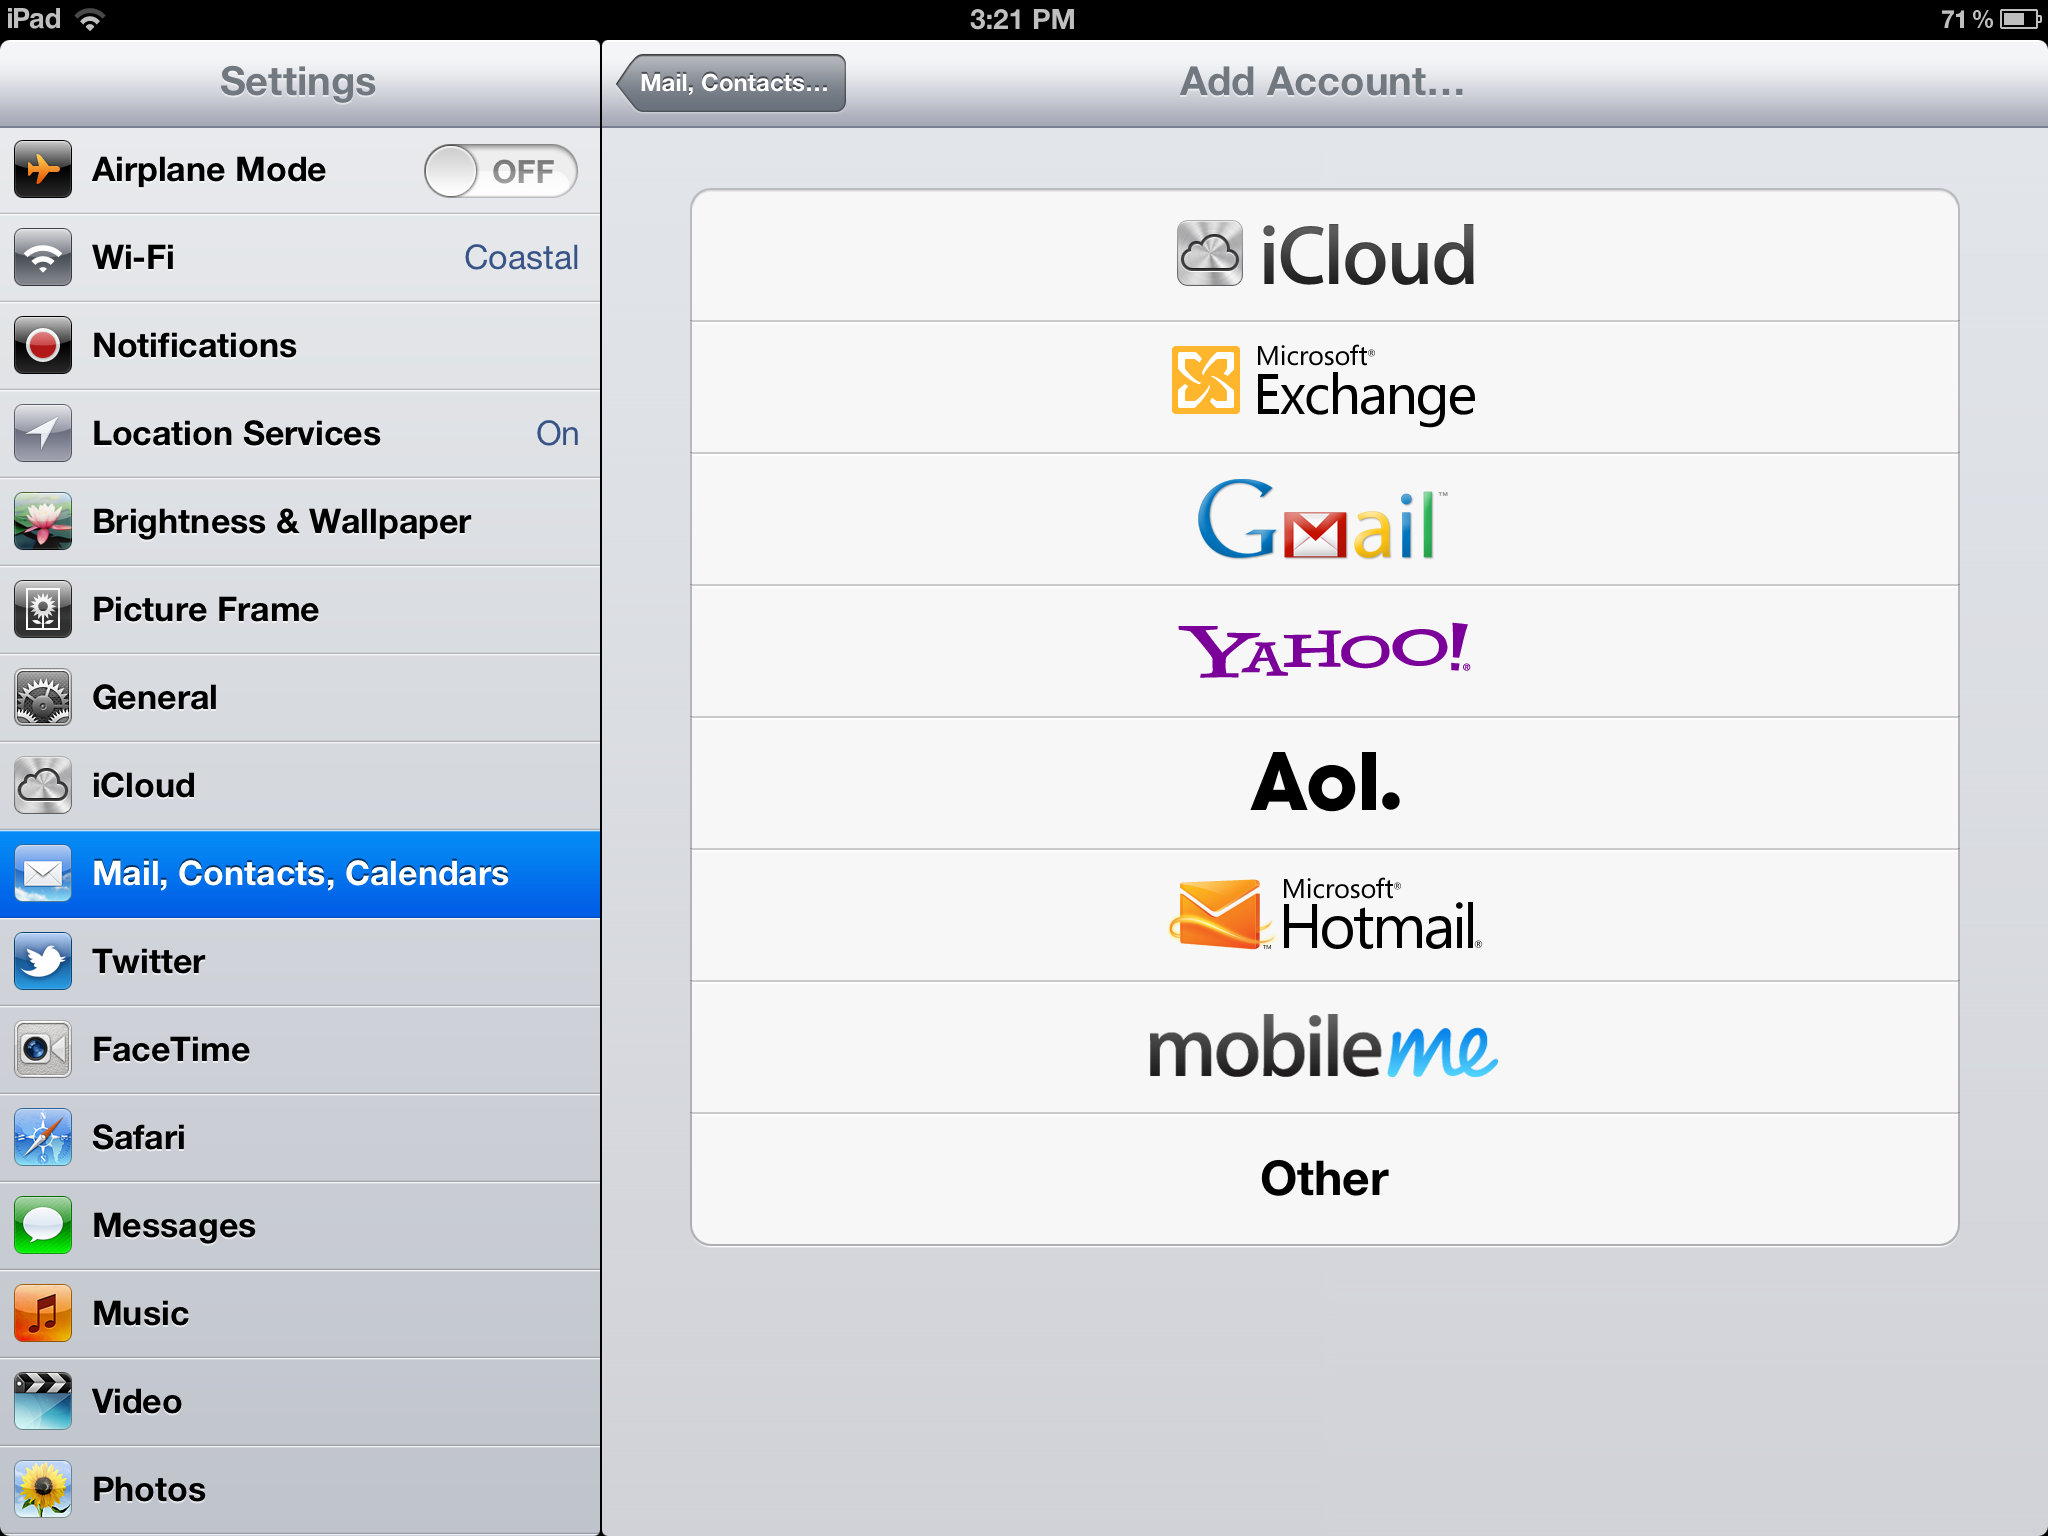 How to add iCloud account to your iPhone iPad or iPod touch